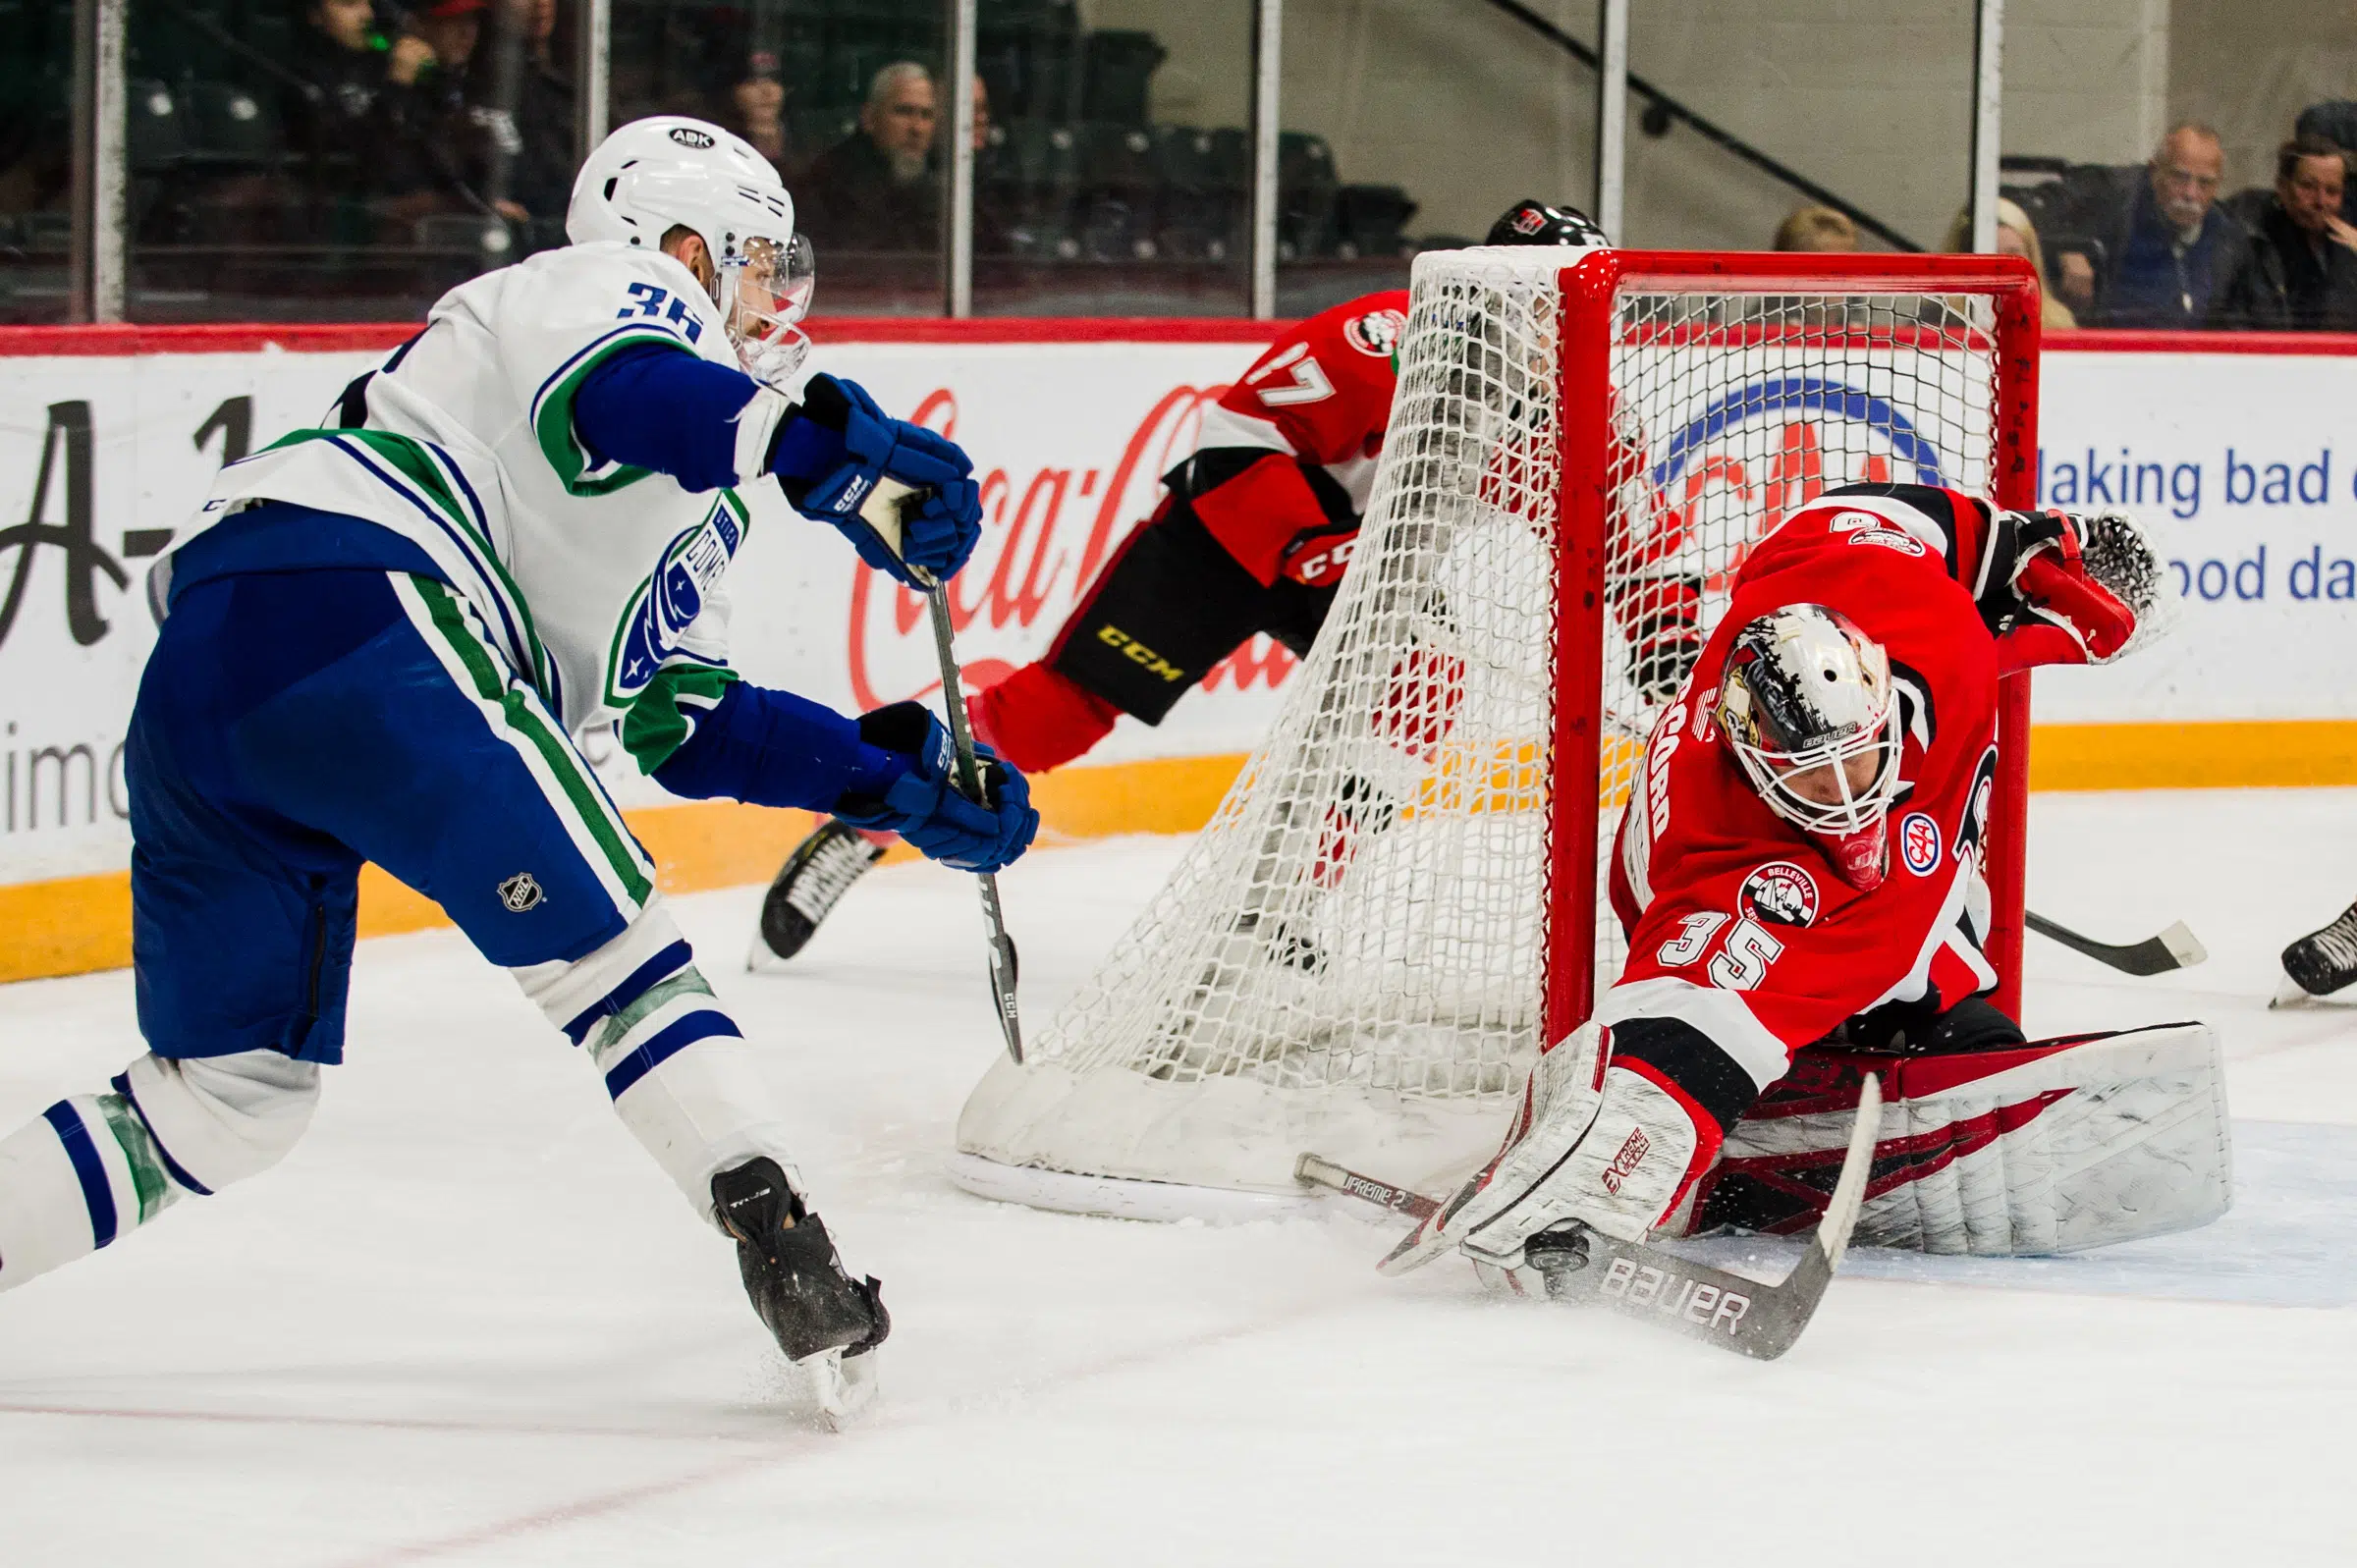 Daccord and the B-Sens shutout the Comets 